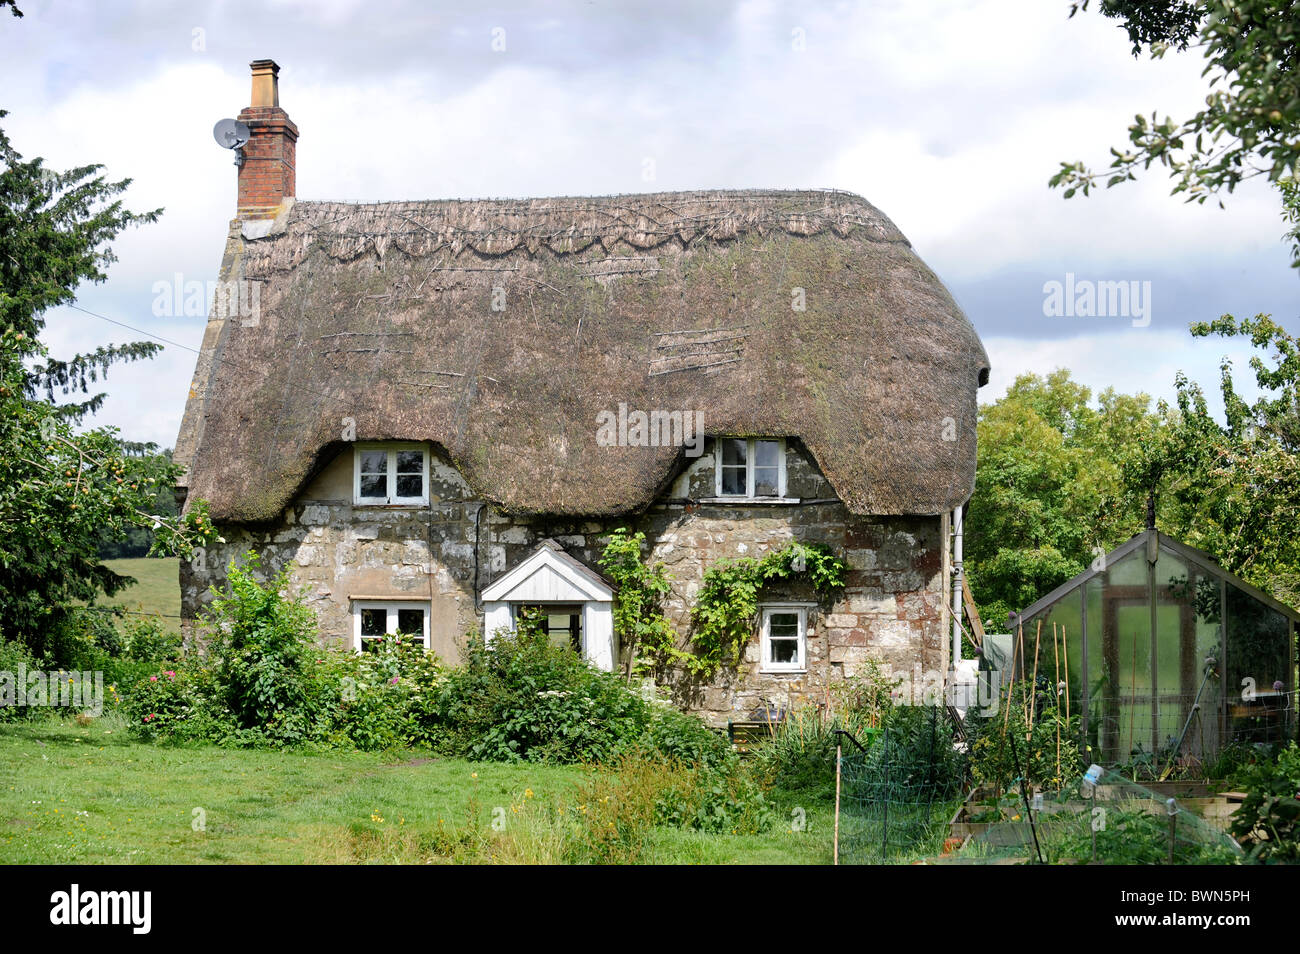 A thatched cottage with chickens in the garden Wiltshire, UK Stock Photo